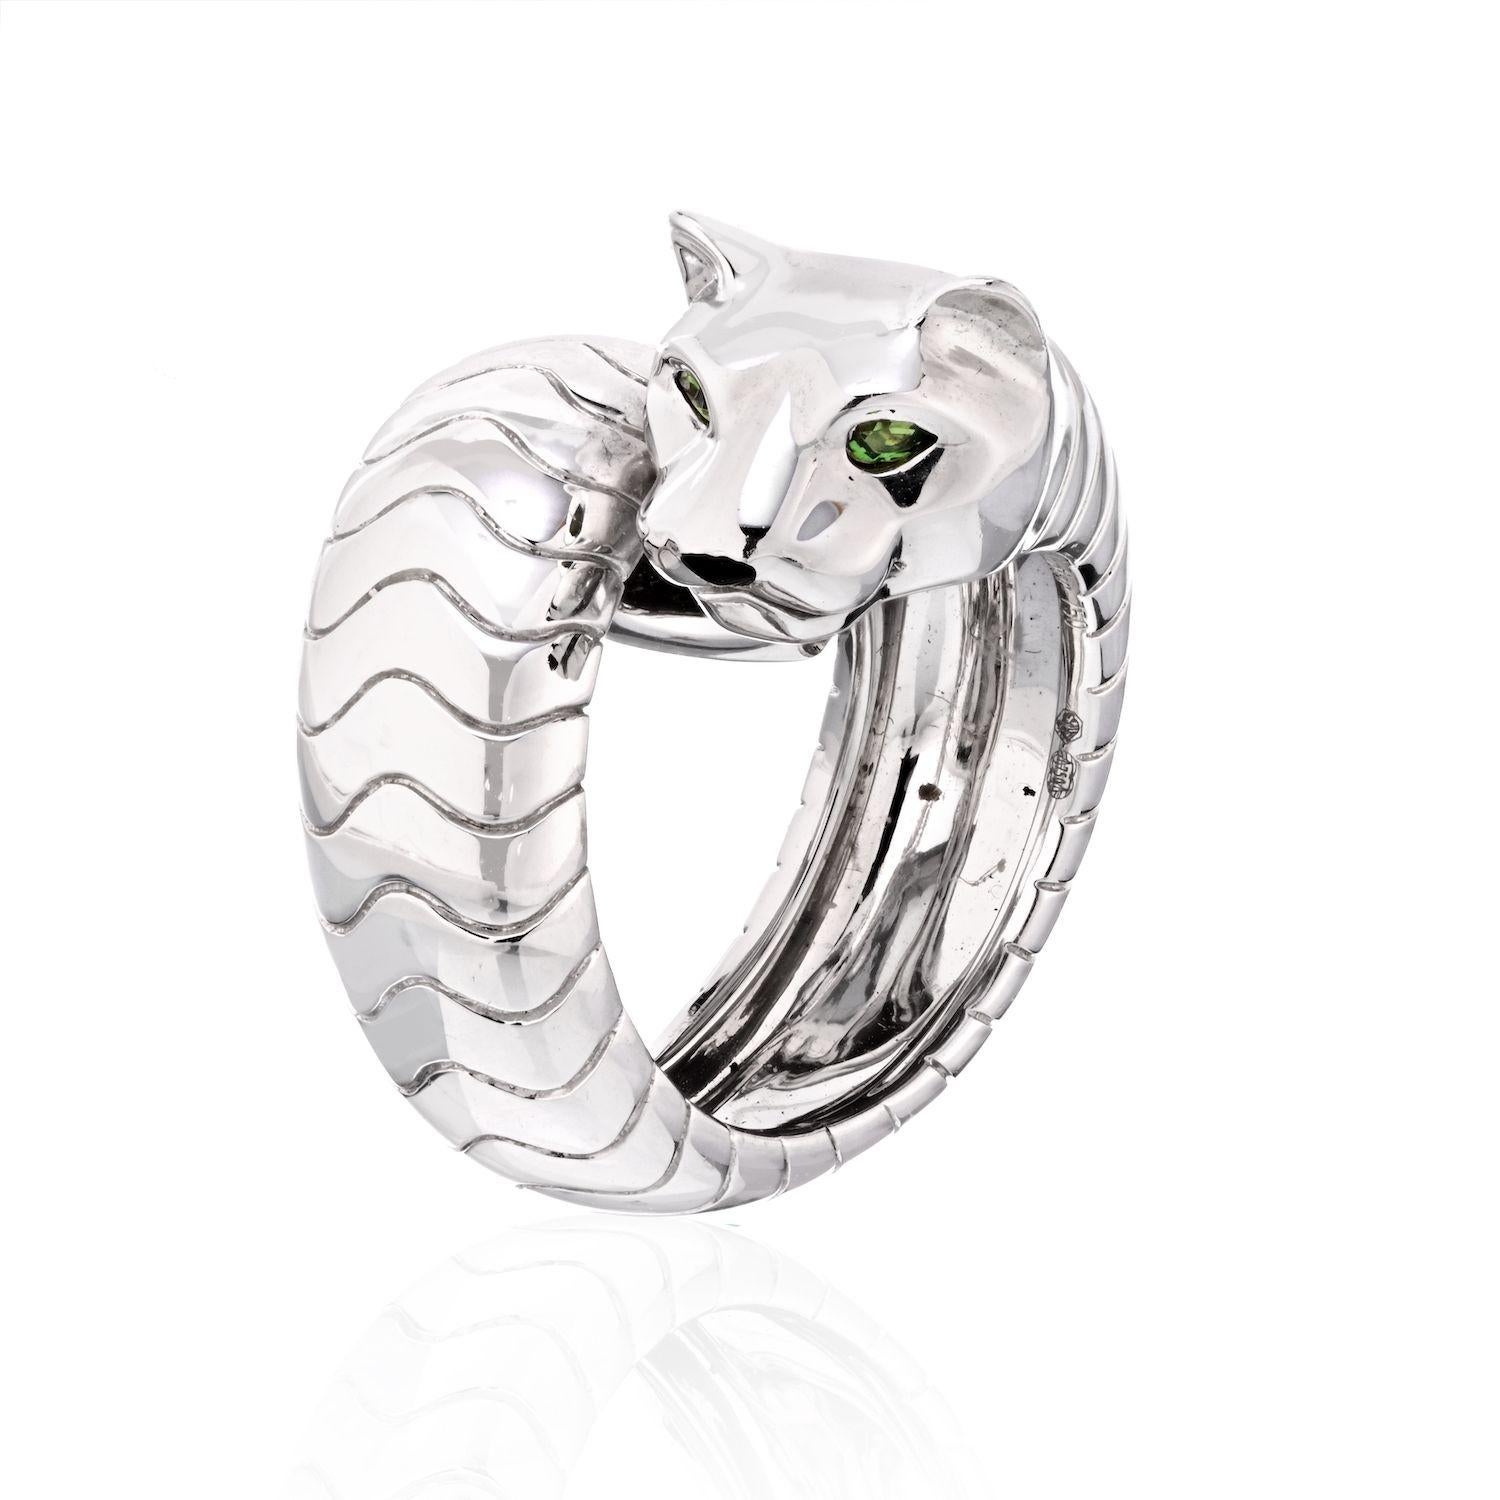 Cartier 18K White Gold High Polished Panthere Lakarda Ring.
From the iconic 